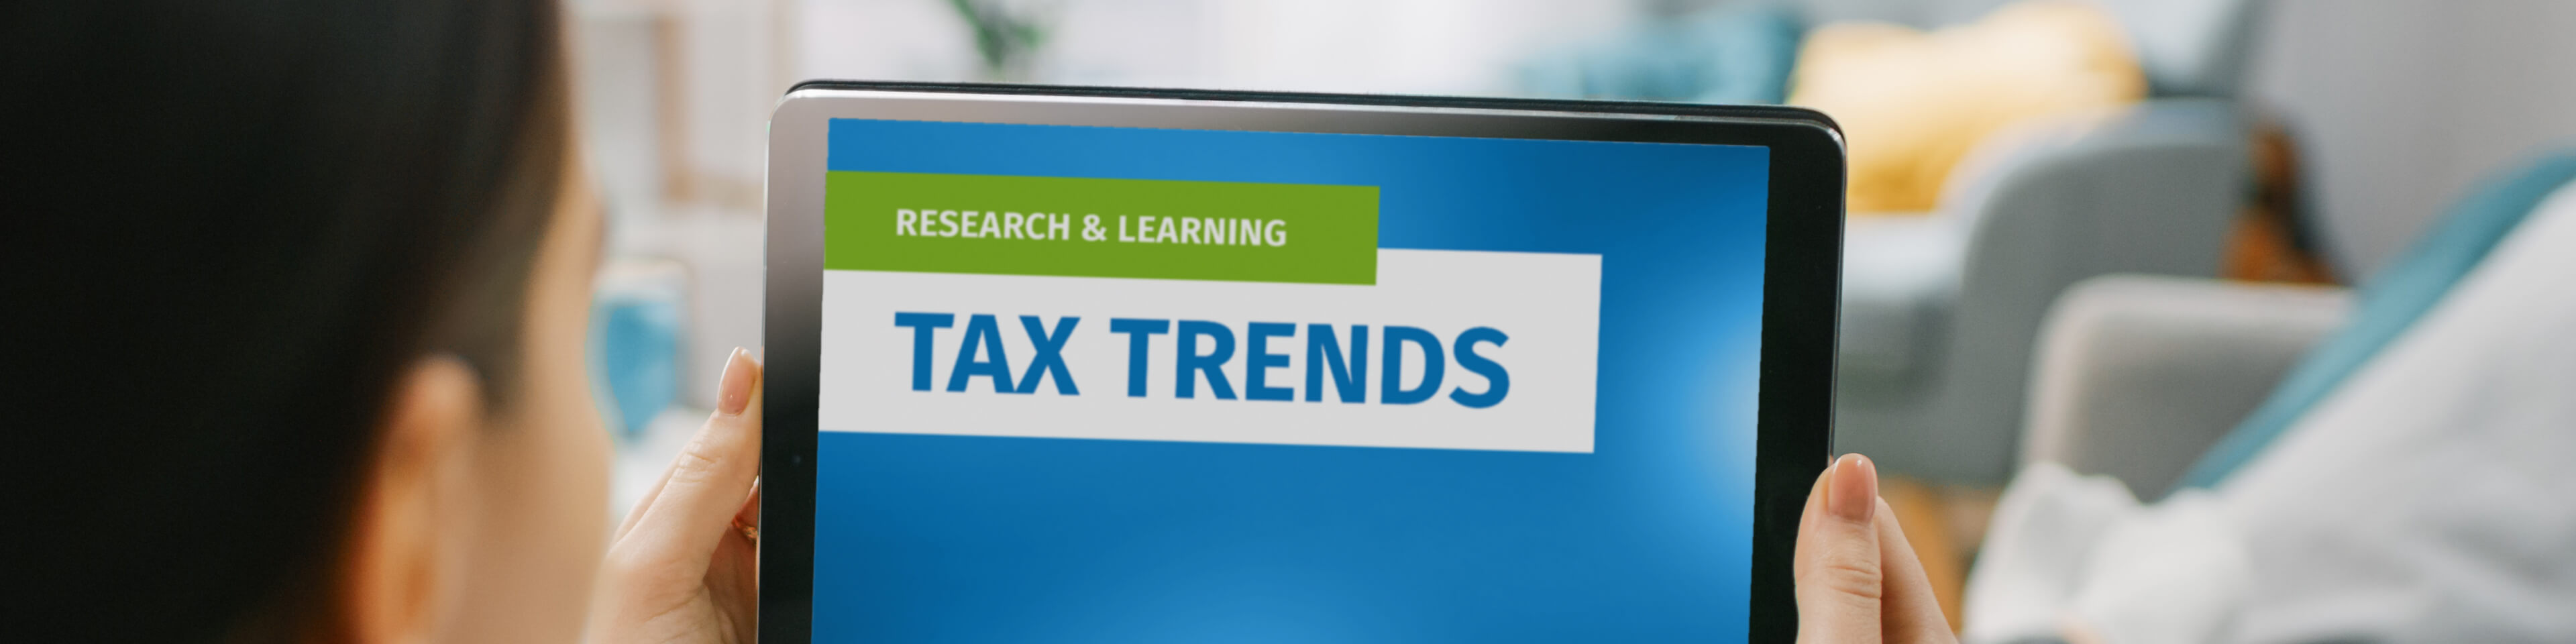 hands typing on a laptop, graphic overlay "Research and Learning Tax Trends"